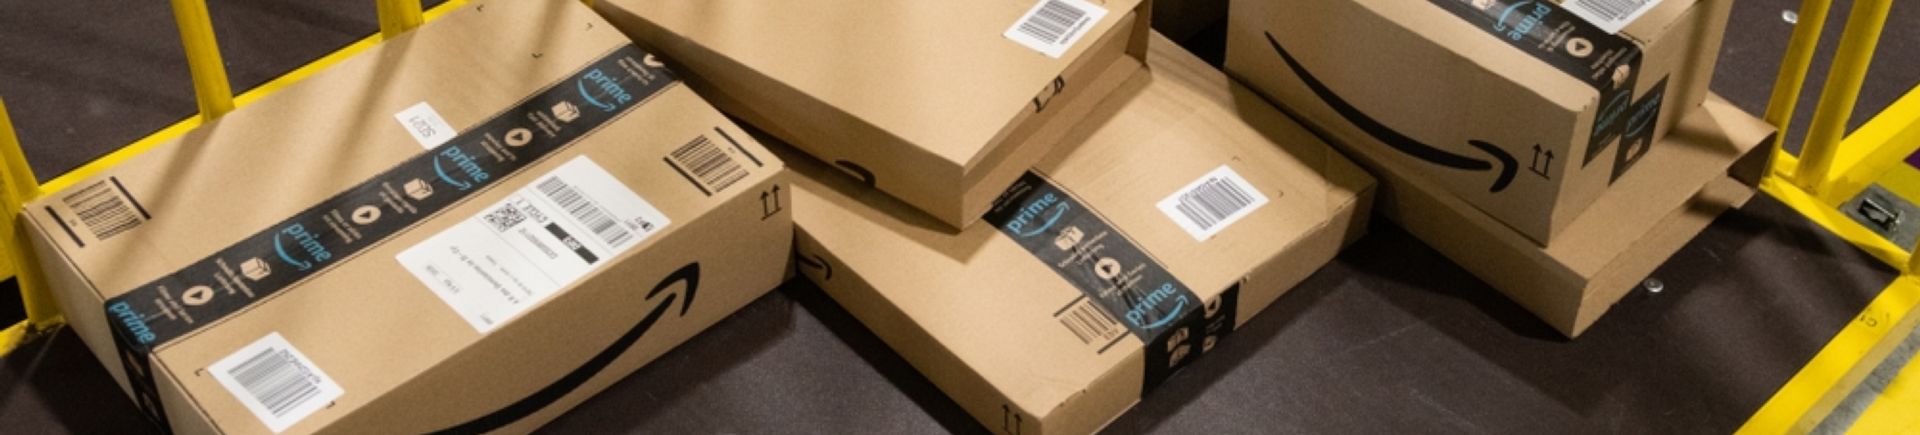 Amazon's Packaging